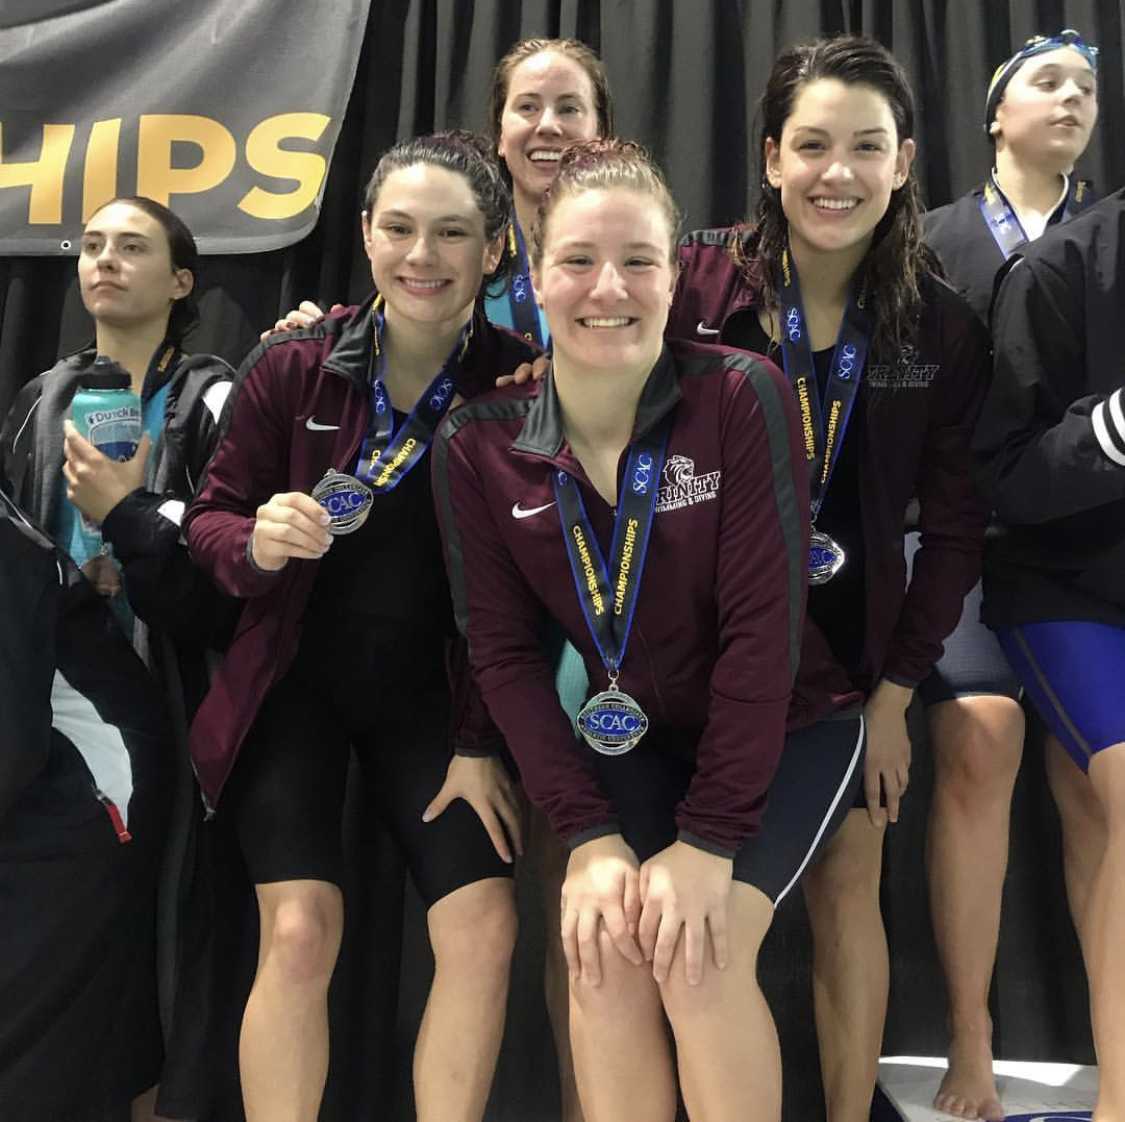 Morgen Reyna FY, Paige Johnson SR, Jadyn Trahan FY, Mabel Fowler SO on podium for 2nd place finish in 400 medley relay